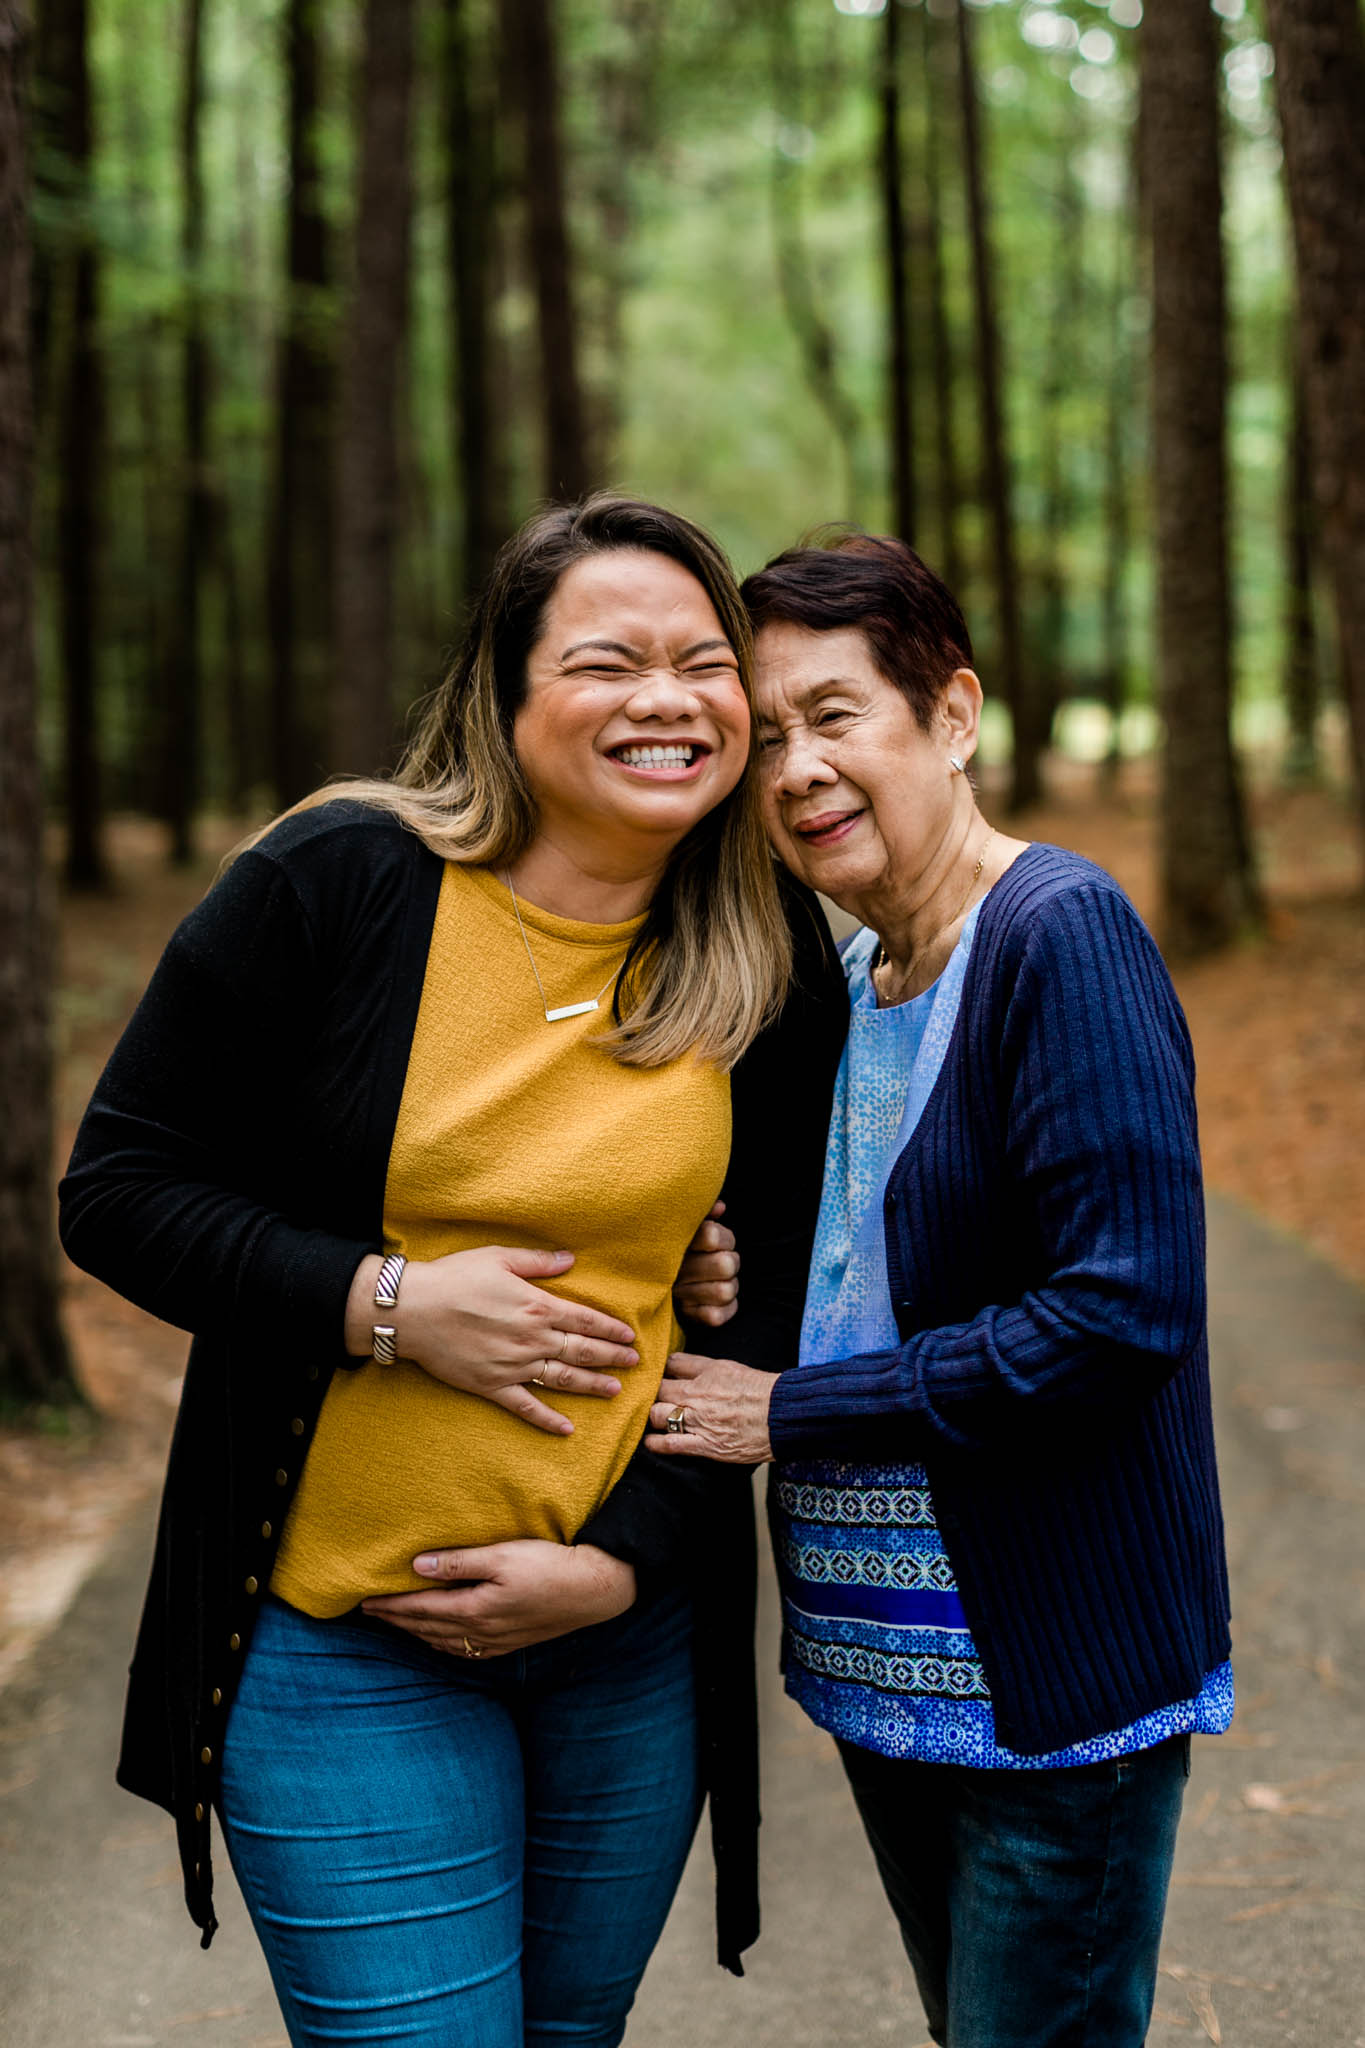 Organic natural family portrait of grandmother and granddaughter | Raleigh Family Photographer | By G. Lin Photography | Umstead Park